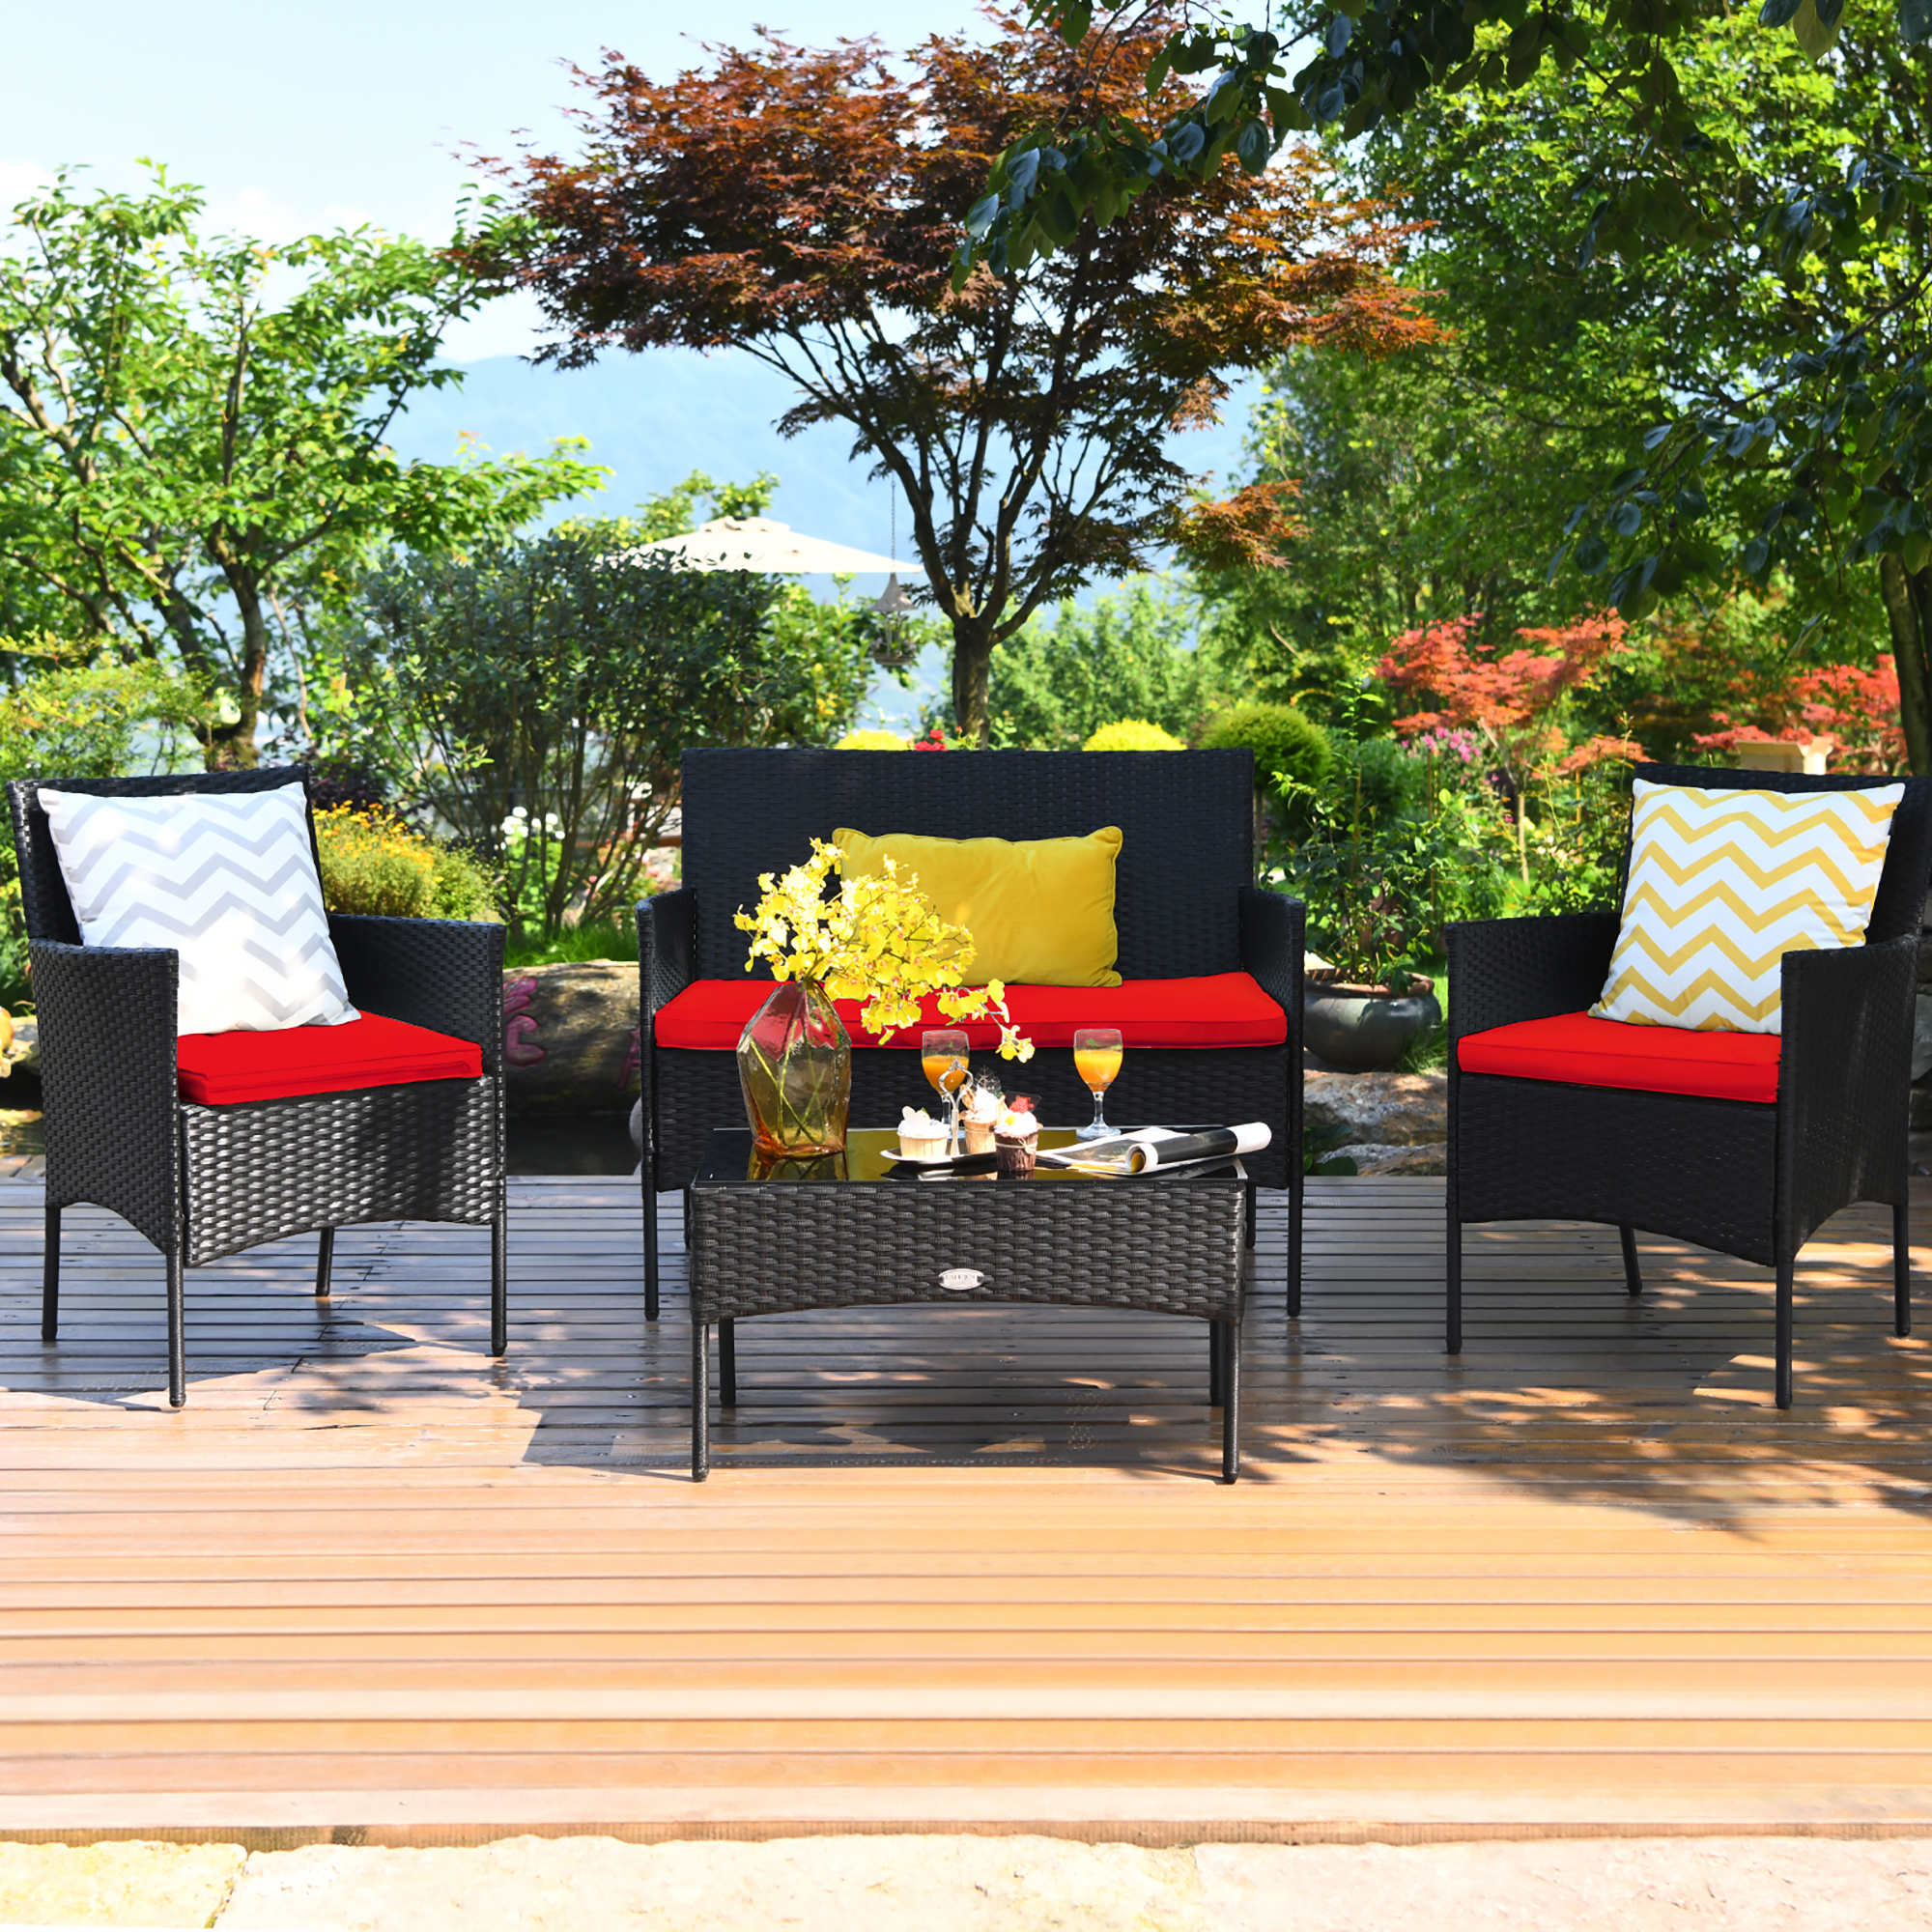 Costway 4PCS Rattan Patio Furniture Set Cushioned Sofa Chair Coffee Table Red - image 1 of 10